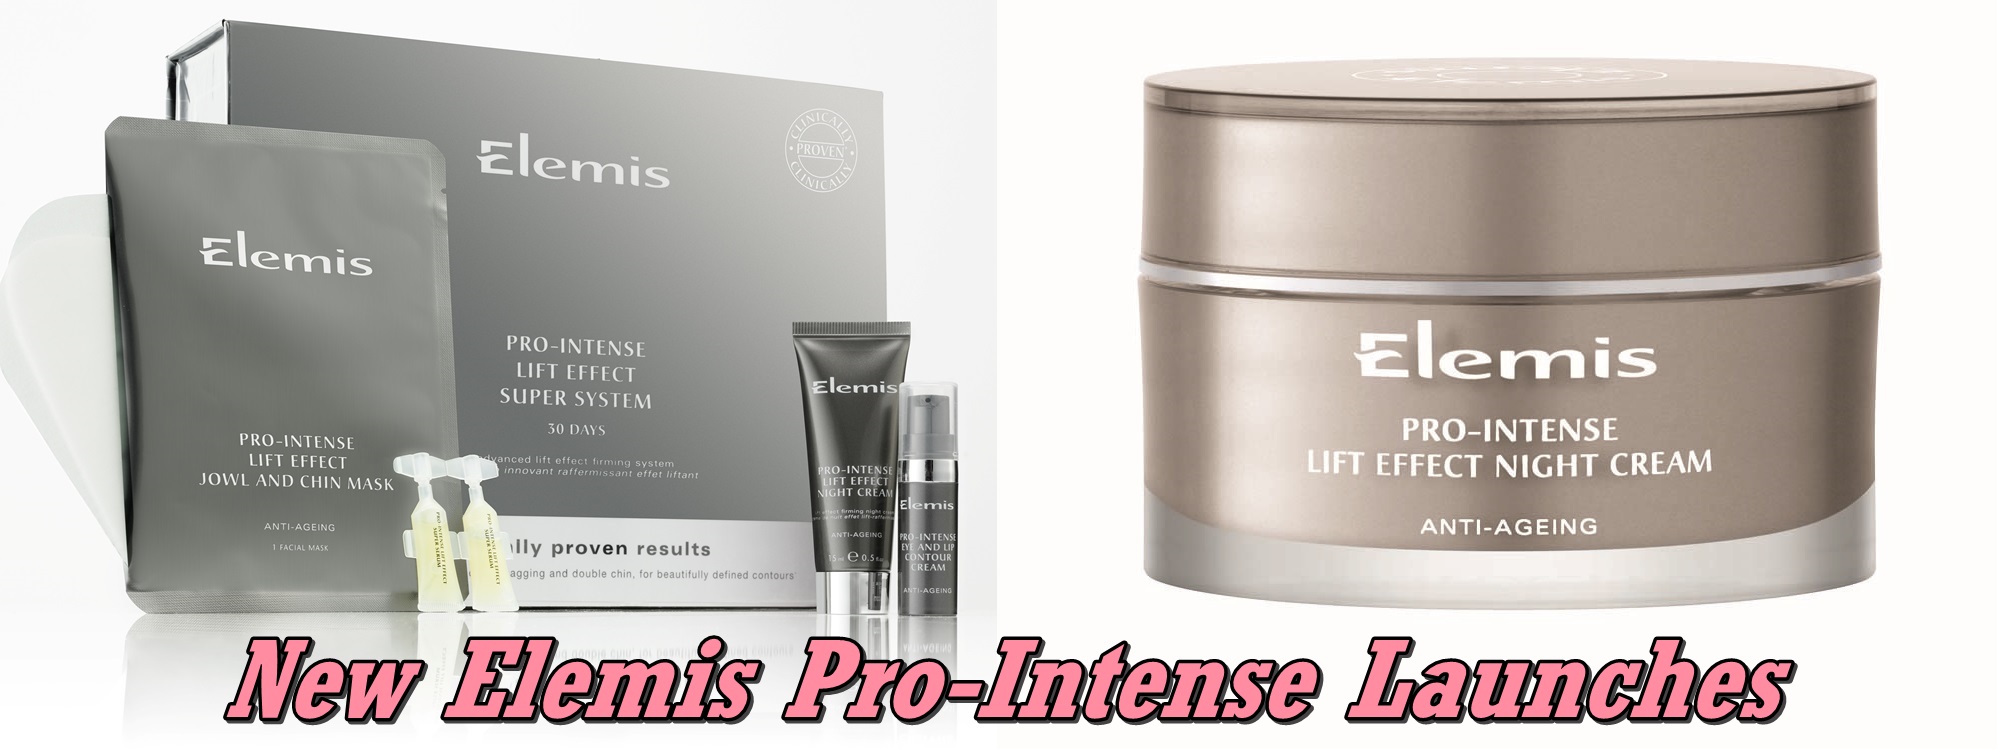 New Elemis Launches: Pro-Intense Lift Effect Super System and Night Cream